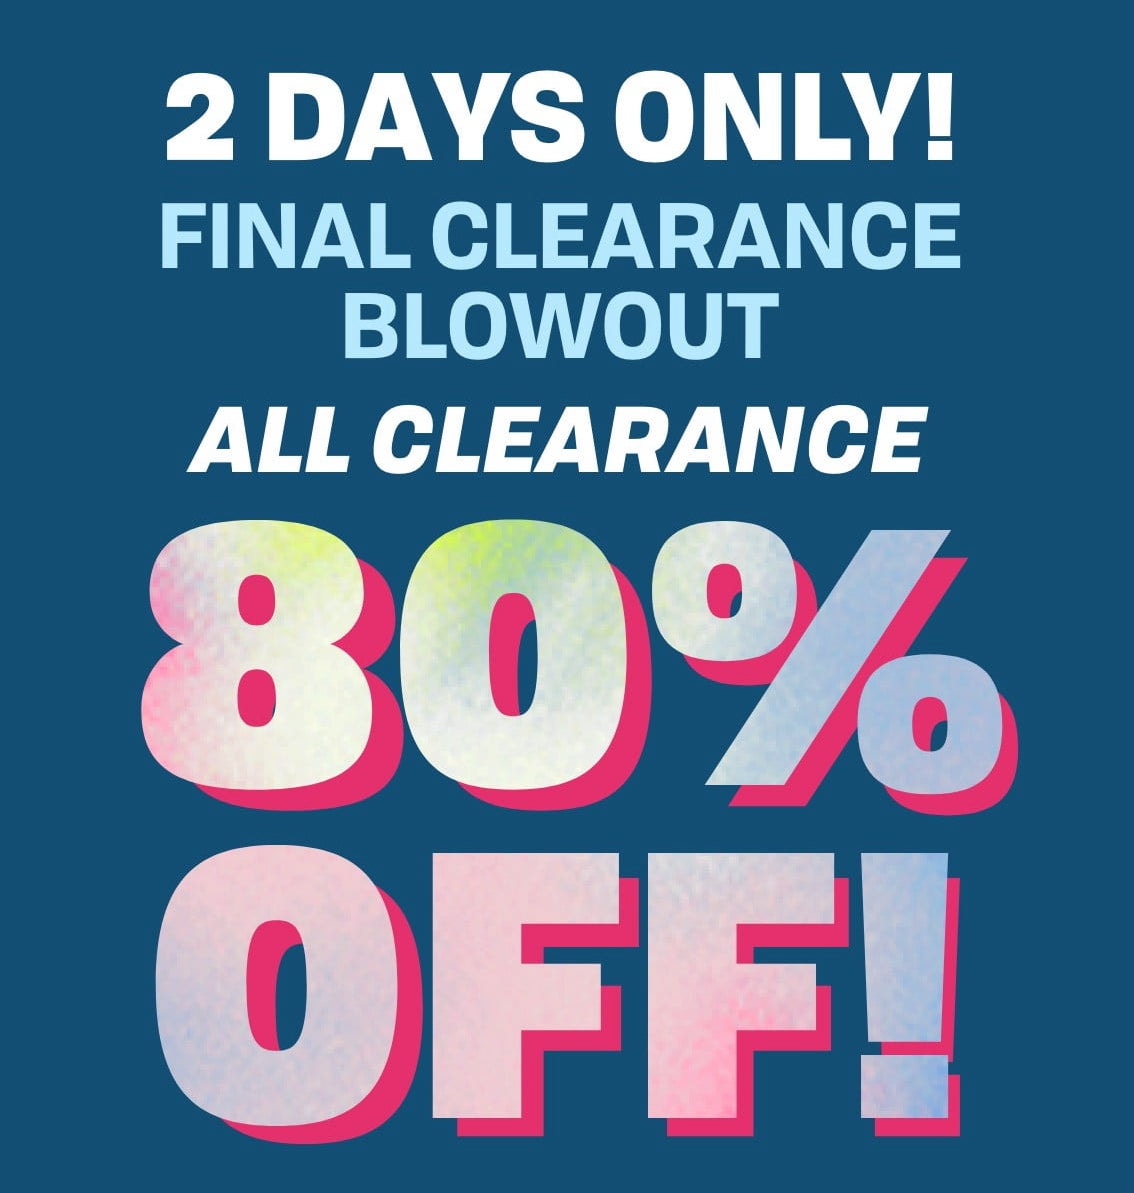 TWO DAY CLEARANCE EVENT